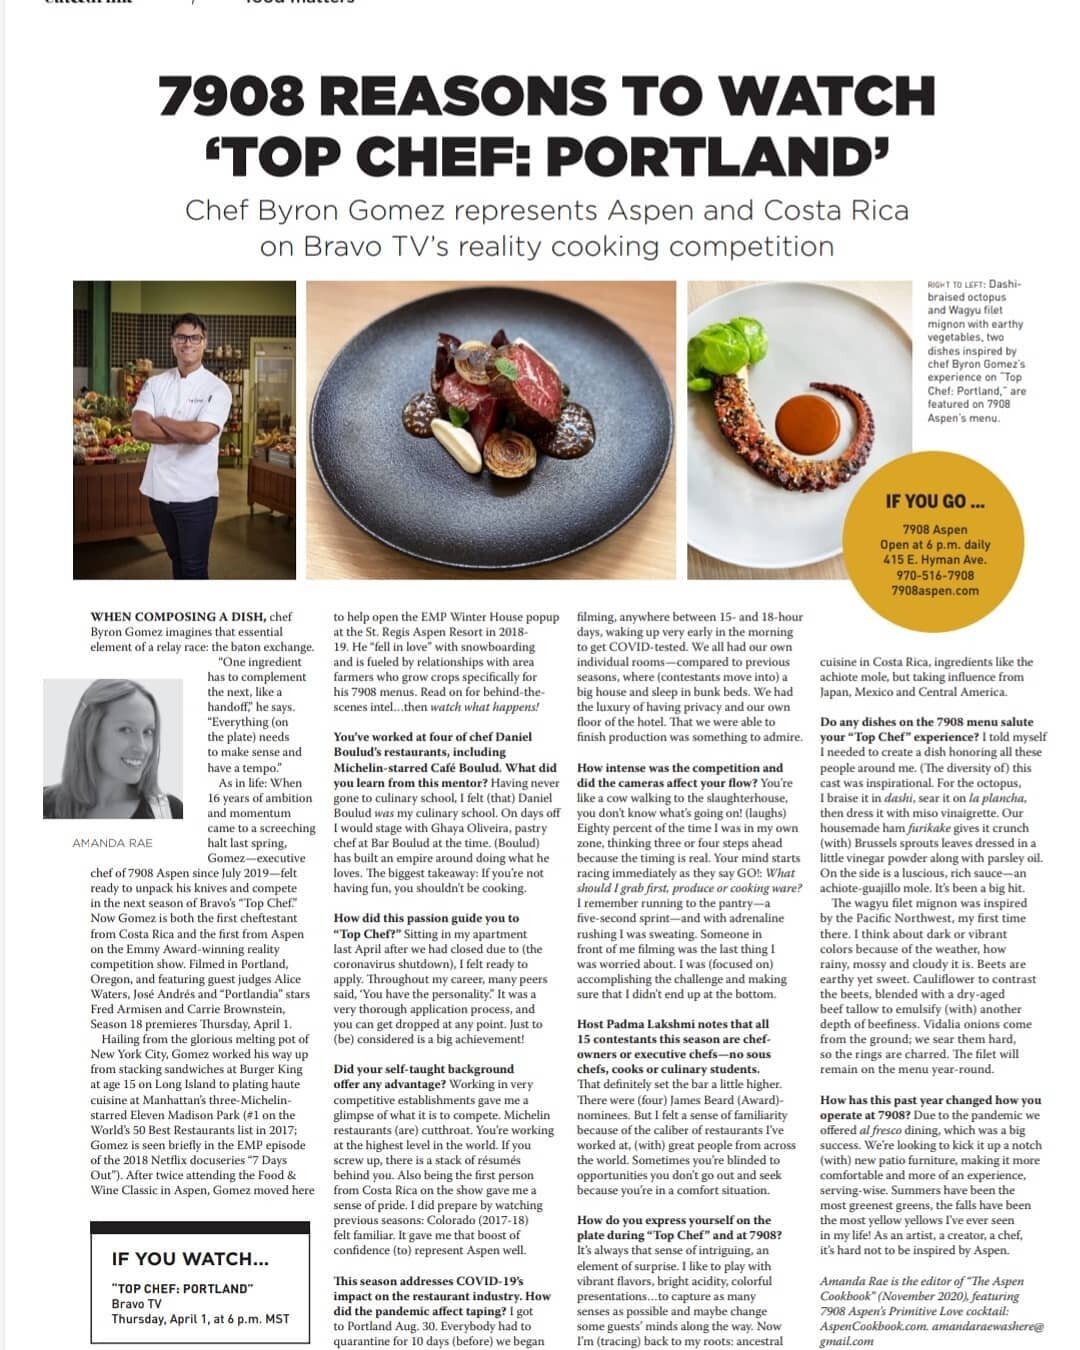 What a fun time and interview from @aspentimes &amp; @amandaraewashere. I invite you to come into @7908aspen before our season is over. If not see you this summer. Don't forget to tune in @bravotopchef Season 18 on April 1st to watch me compete and r